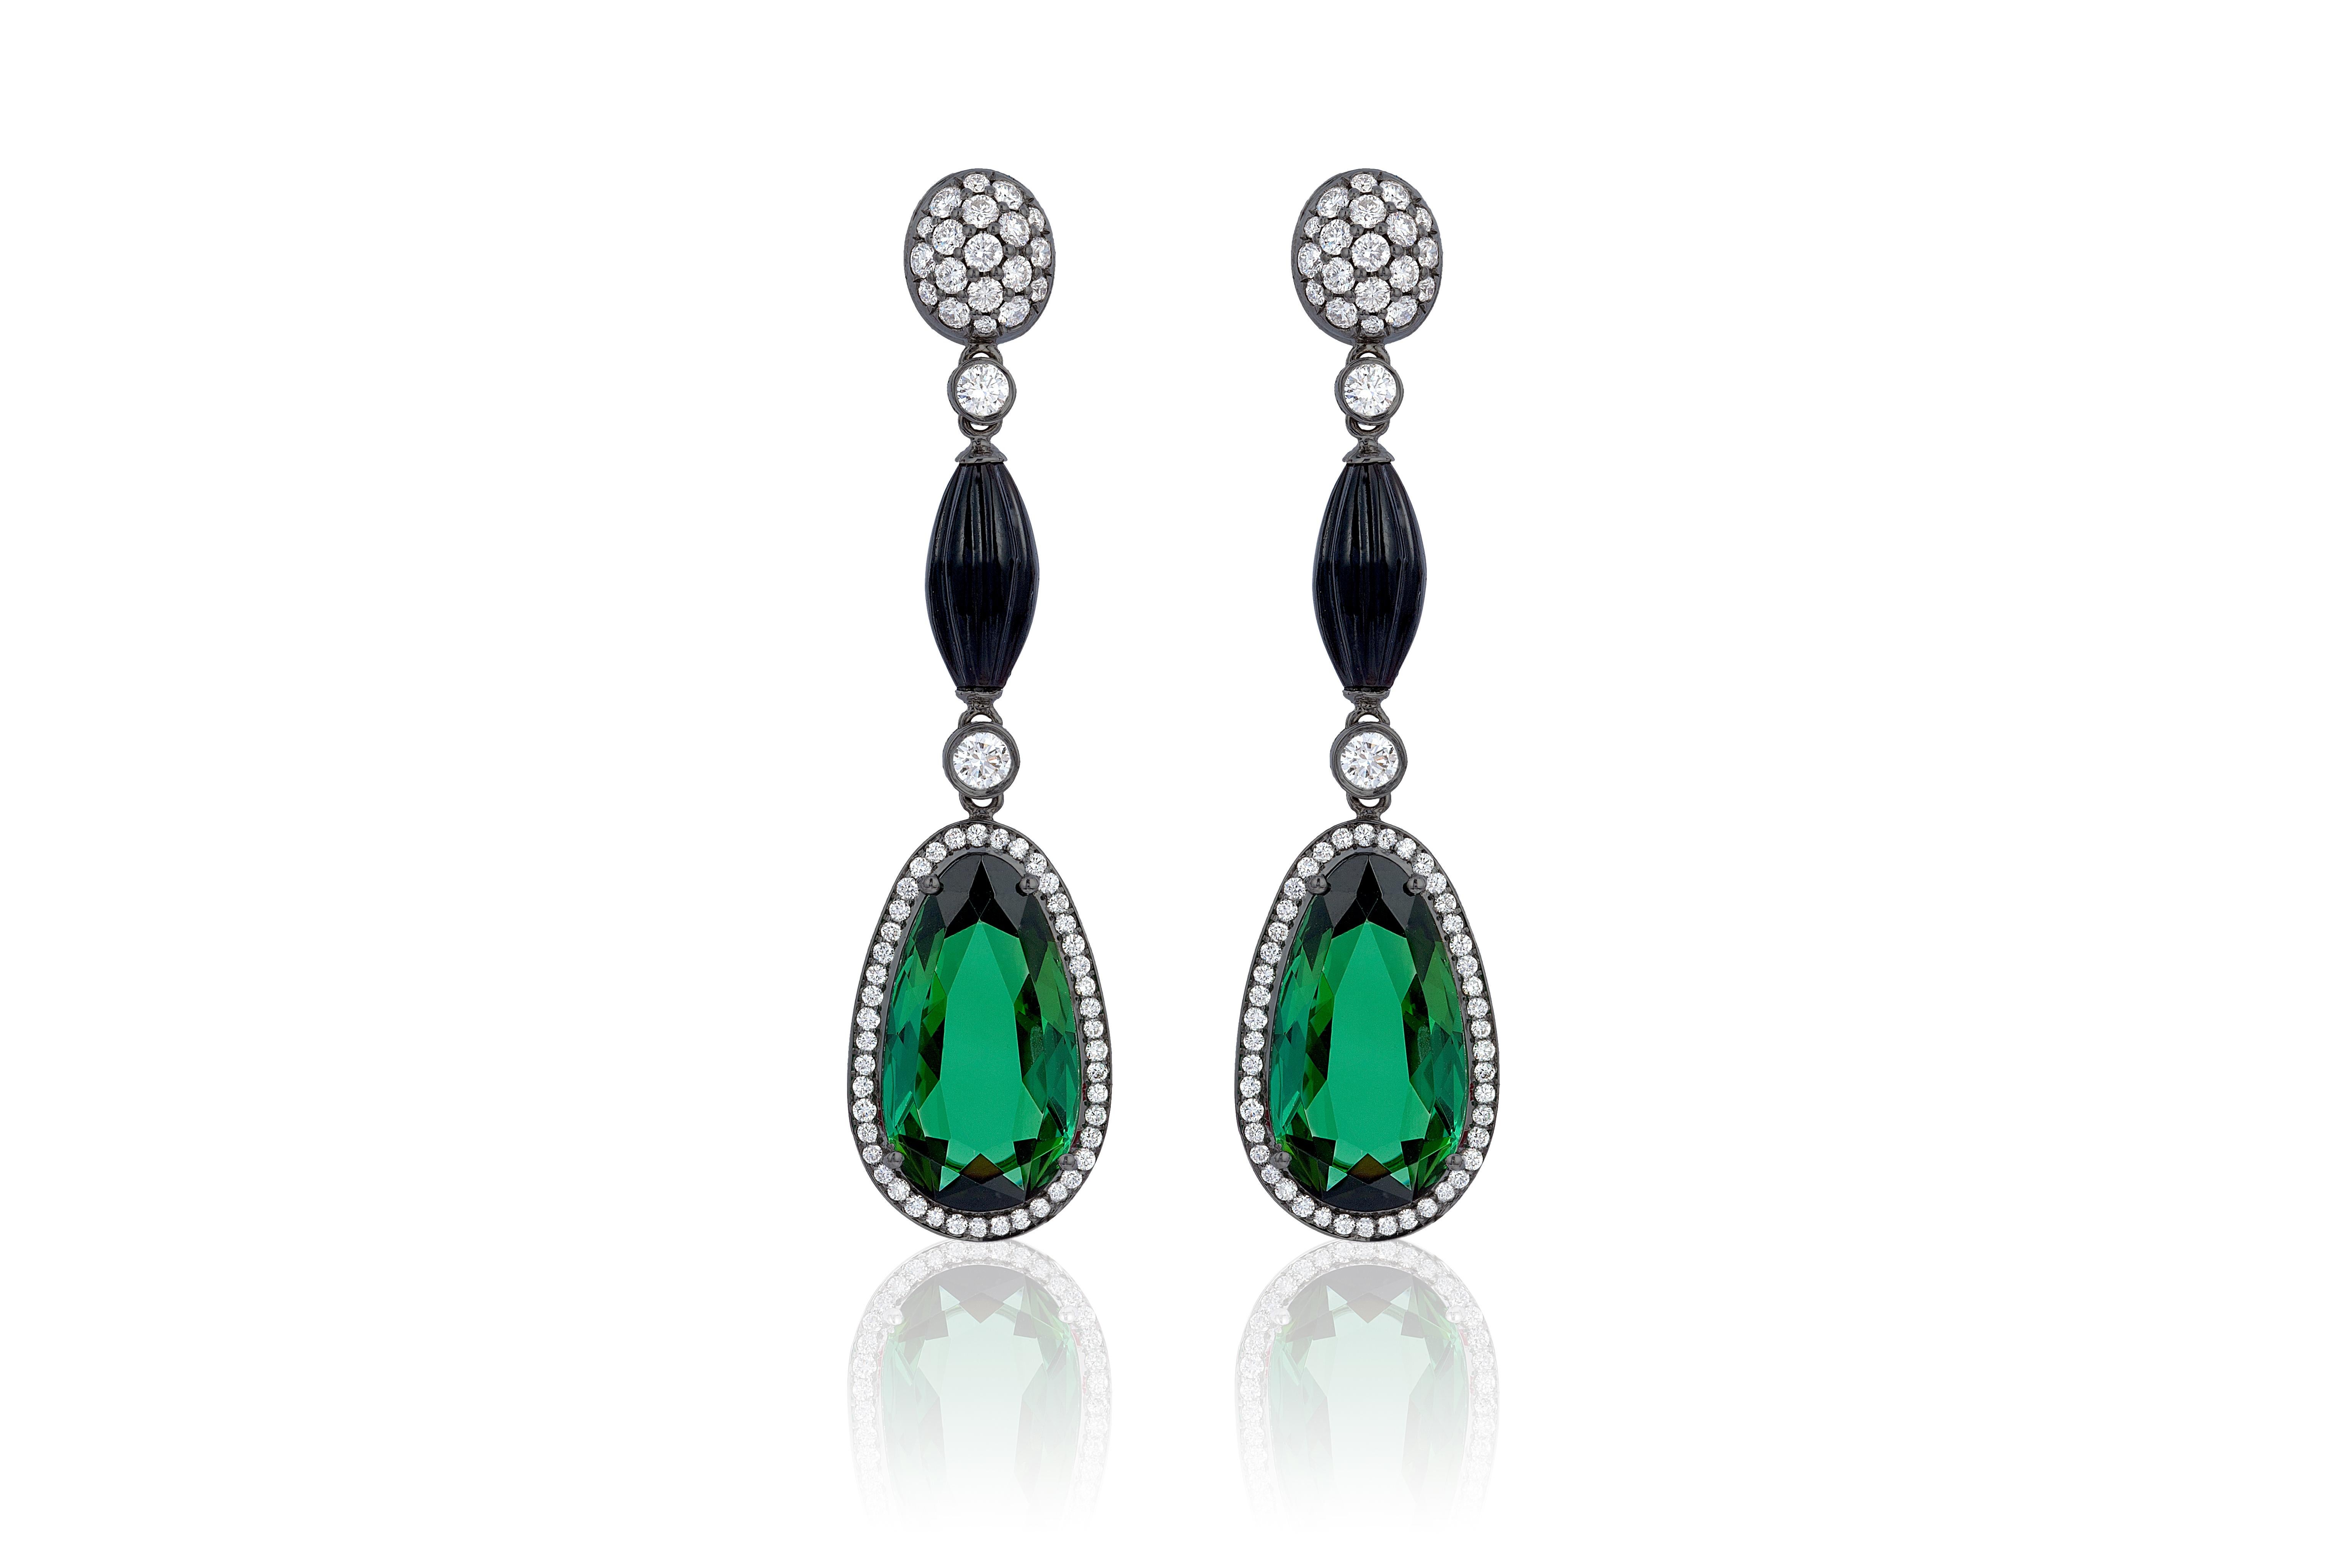 These Green Tourmaline Pear Shape with Onyx Briolette Long Bead Earrings and Diamond Oval Motif in 18K White Gold are exquisite earrings from the 'G-One' Collection. These earrings are designed to add a touch of elegance and luxury to your special